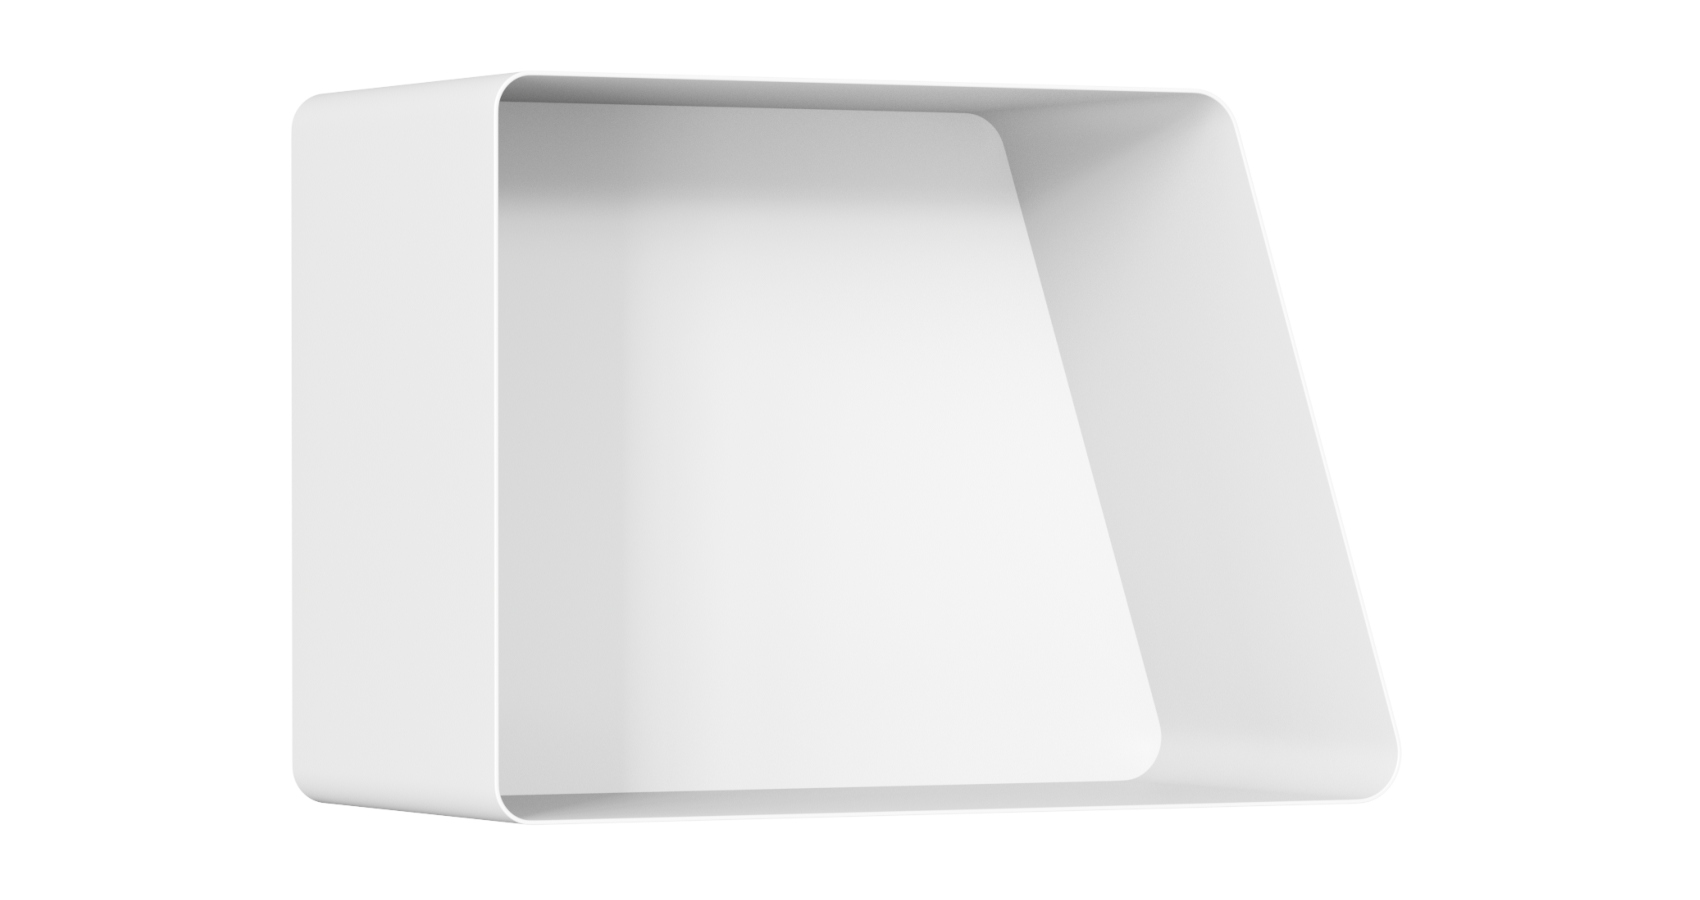 Pixa Wall Mounted closed shelf in white in front view